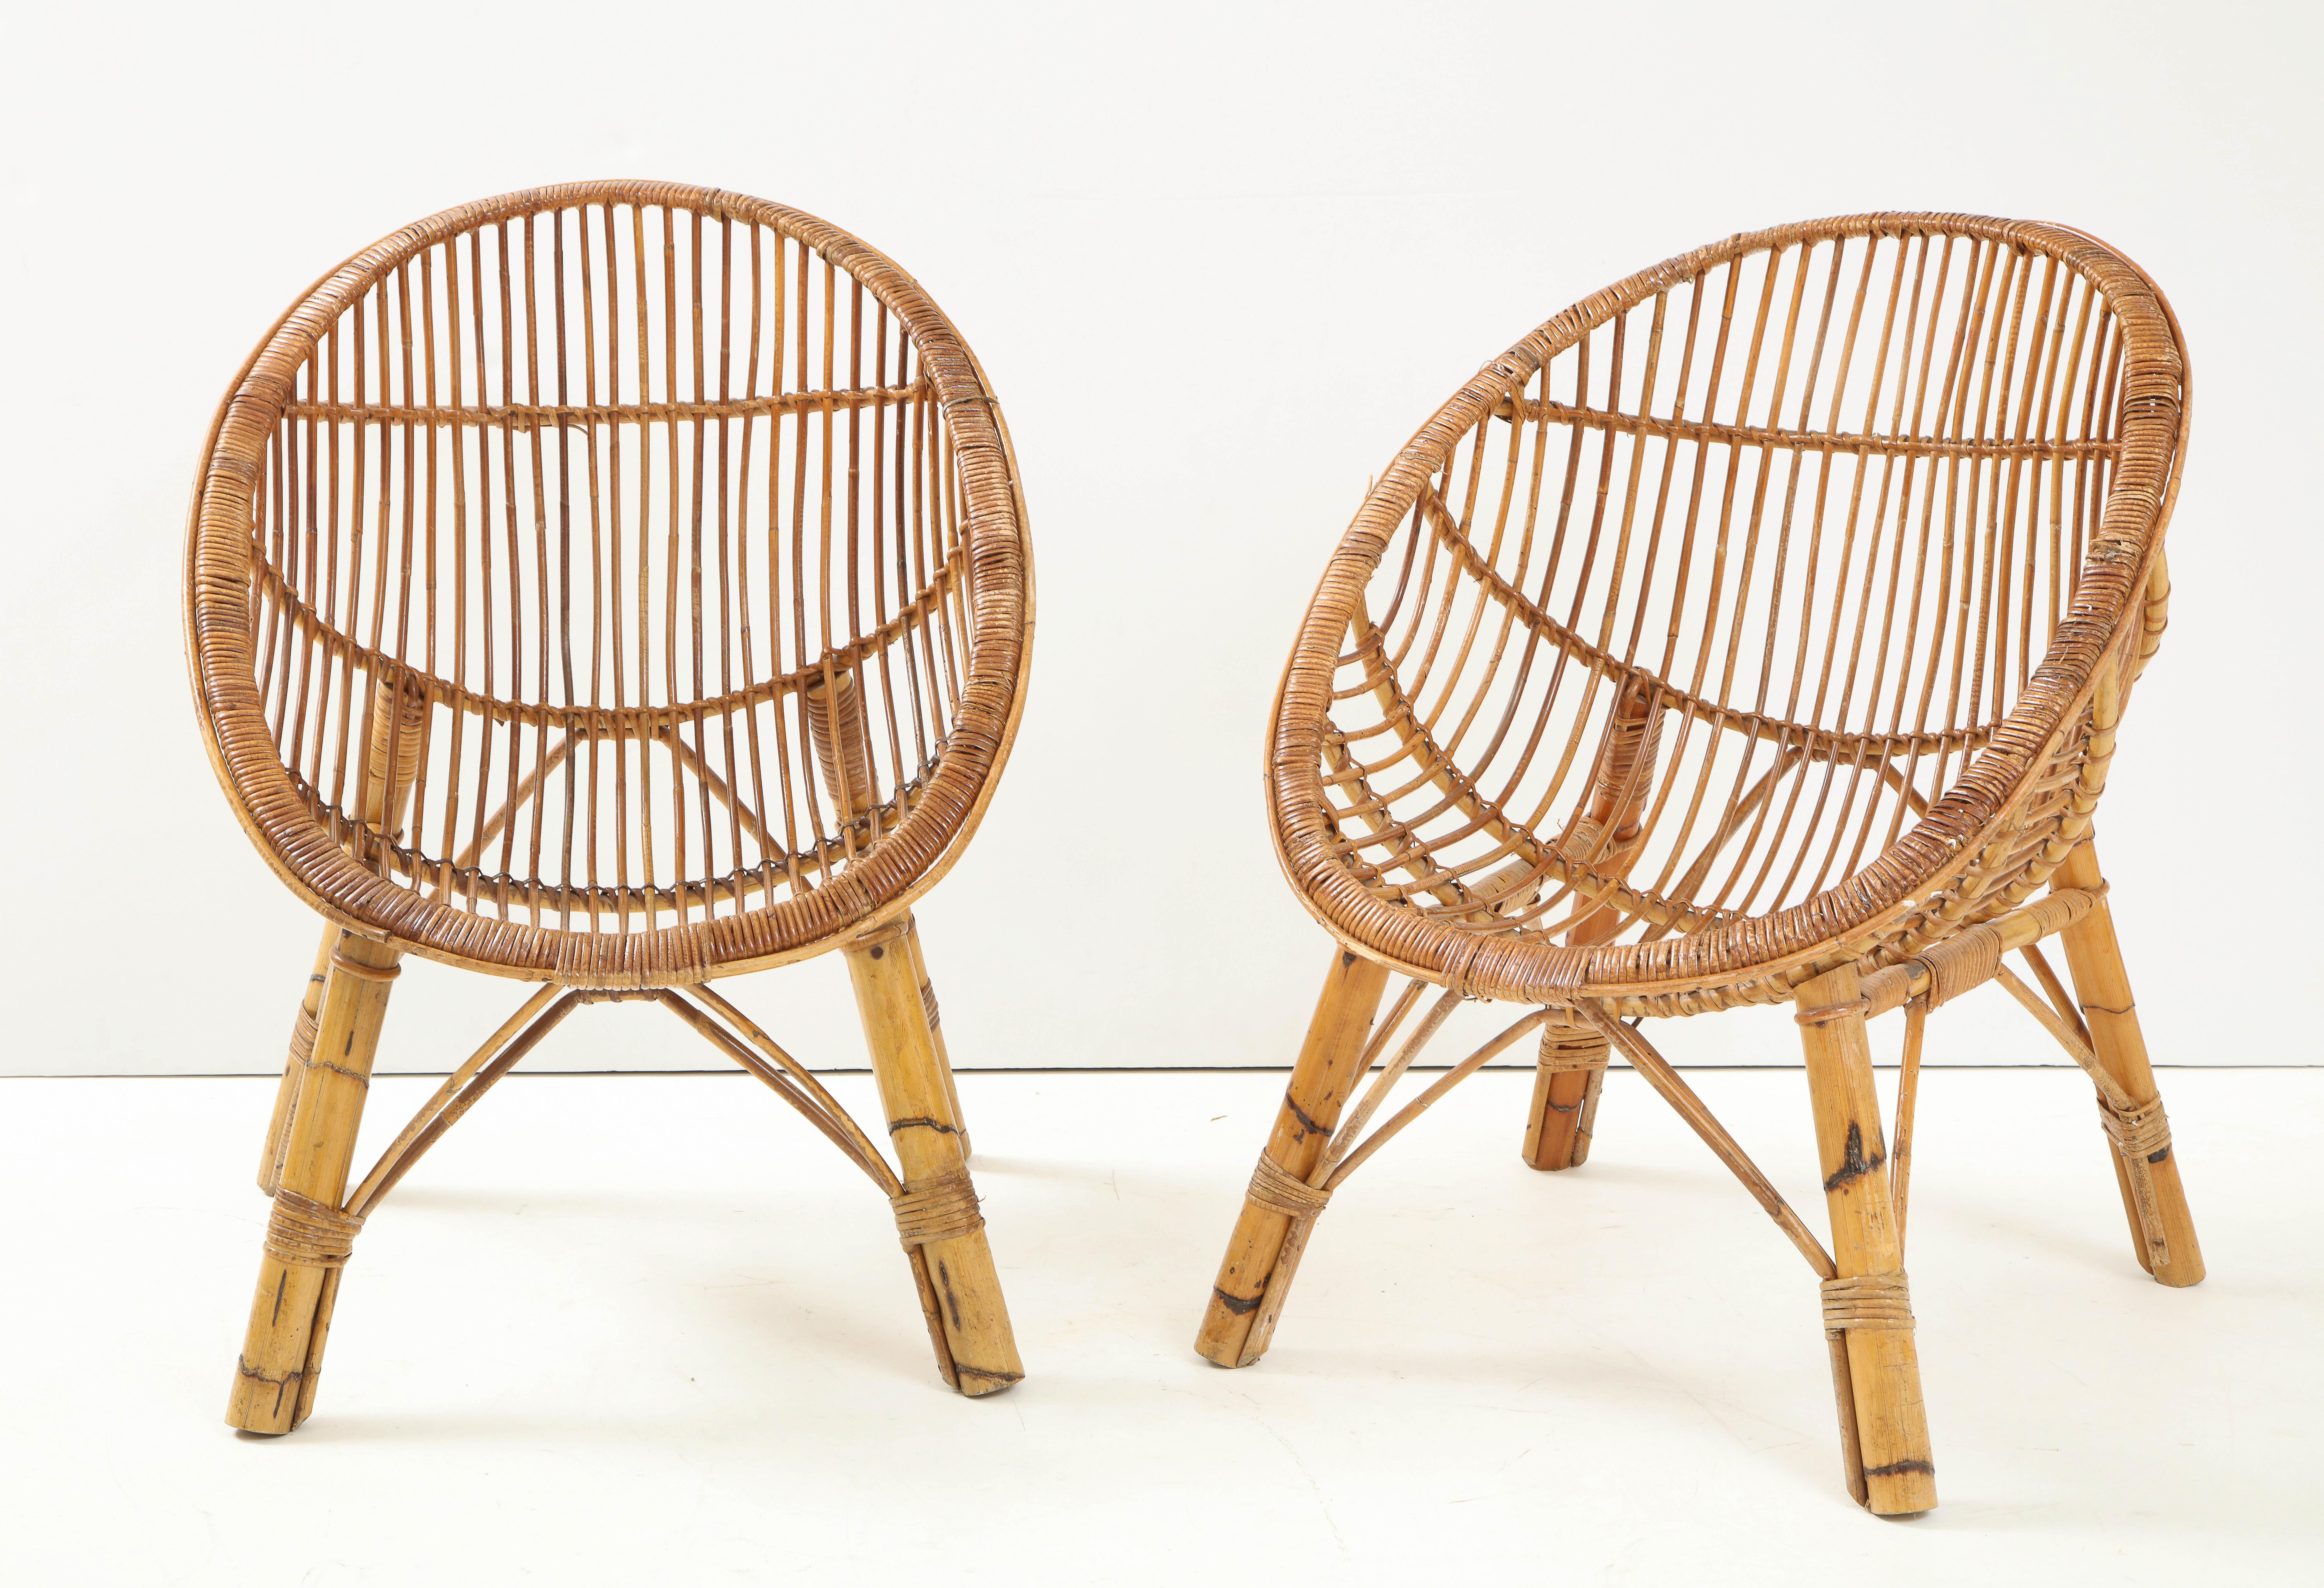 A pair of bamboo armchairs with a charming scoop shape which molds to one's body. Beautiful, organic and sculptural piece to add interest to any setting. 
Italy, circa 1950's 
Size: 33